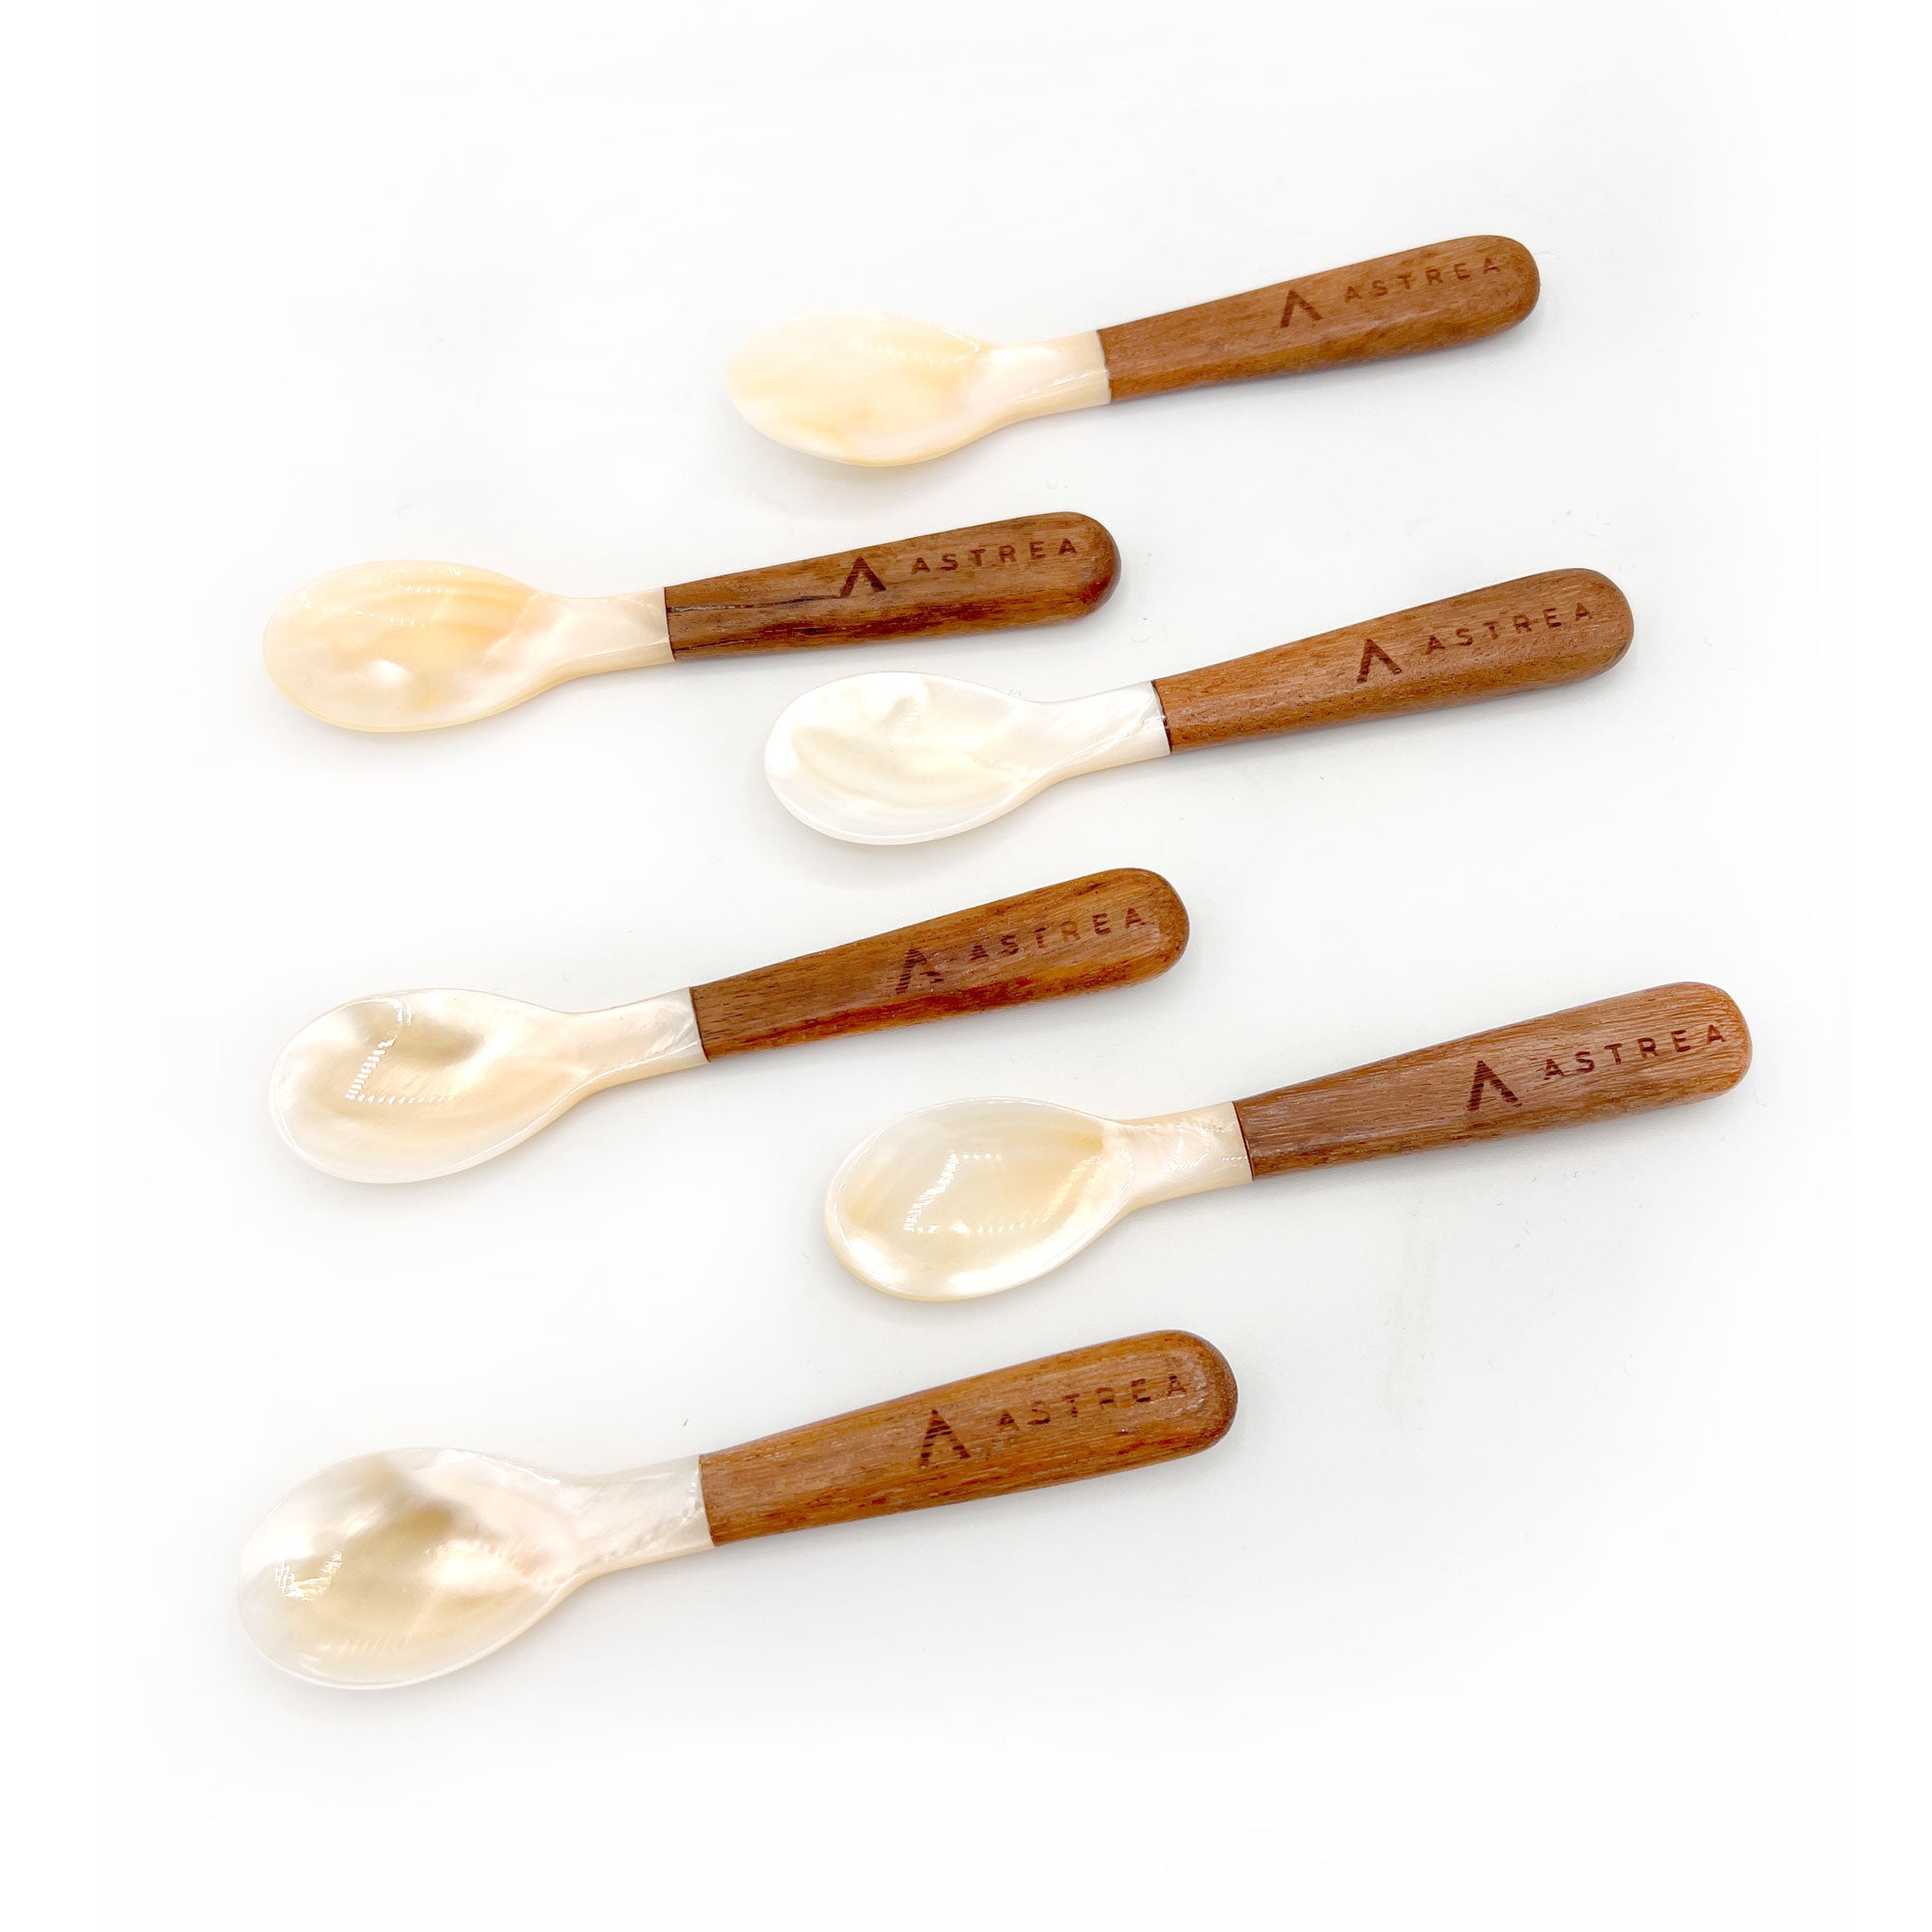 Astrea Mother of Pearl Spoon w/ Wooden Handle